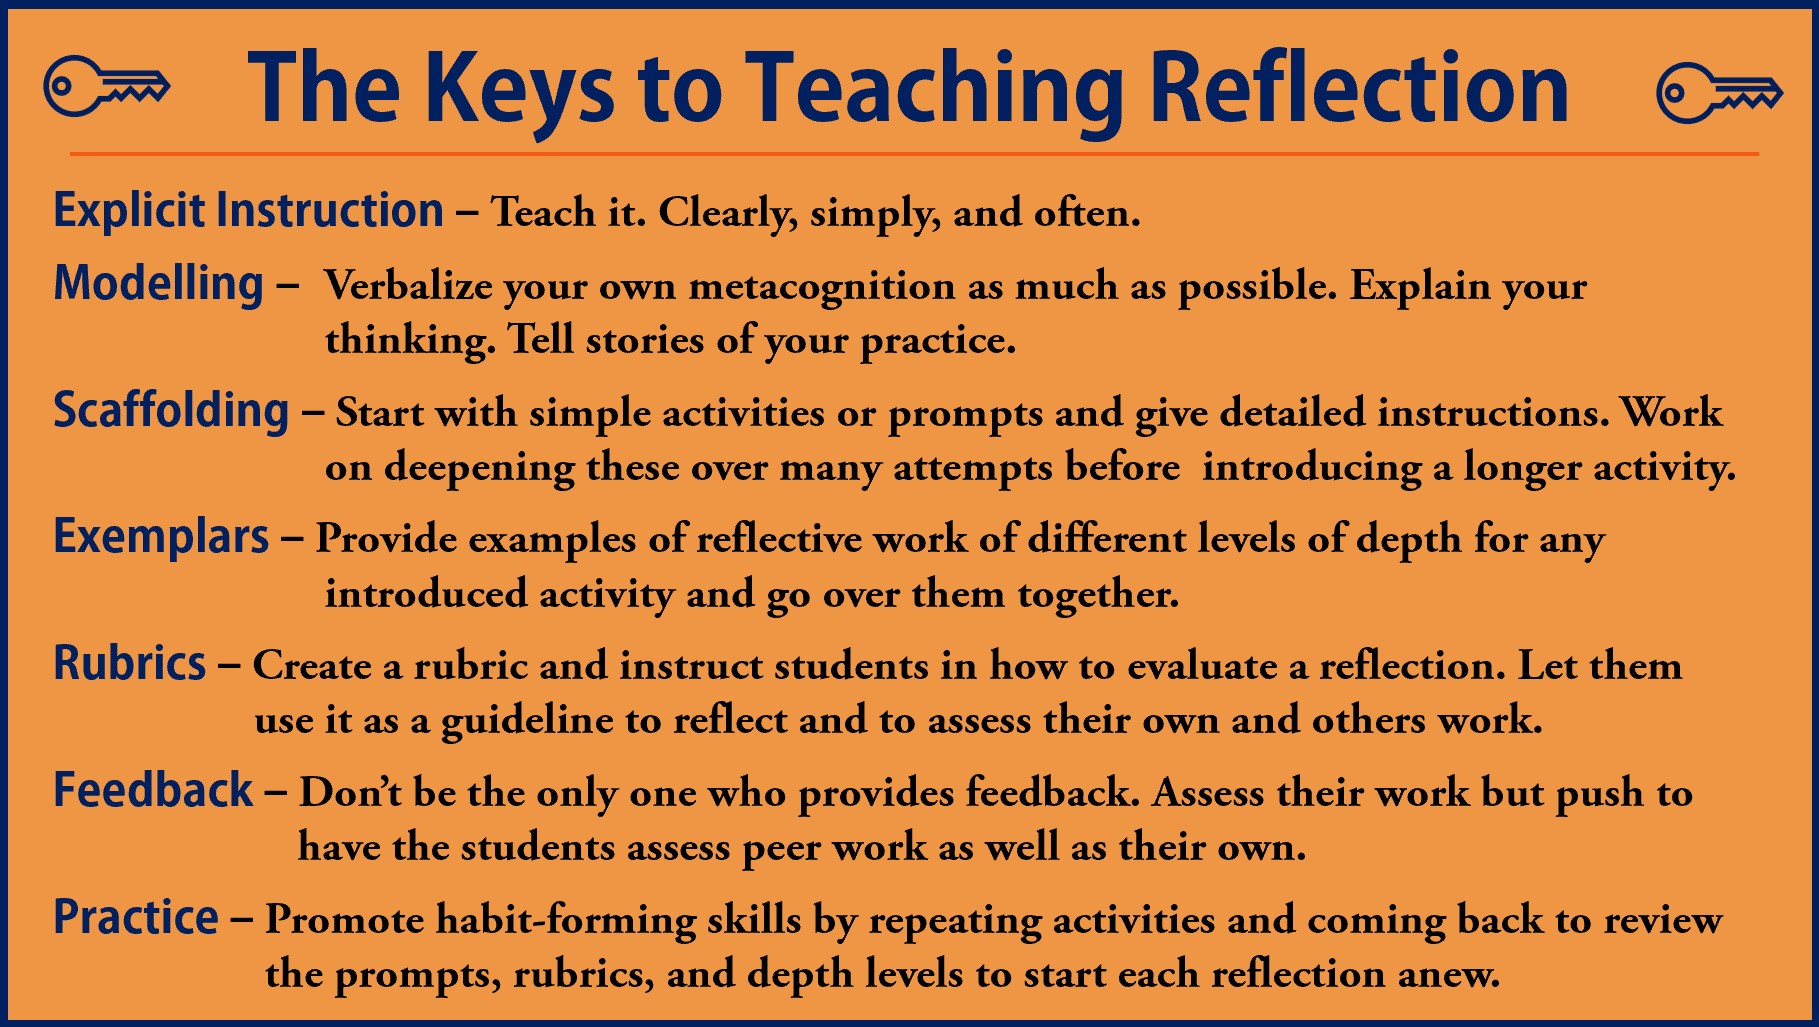 A summary graphic of the key teaching principles for reflection: explicit instruction, modelling, scaffolding, exemplars, rubrics, feedback, practice.